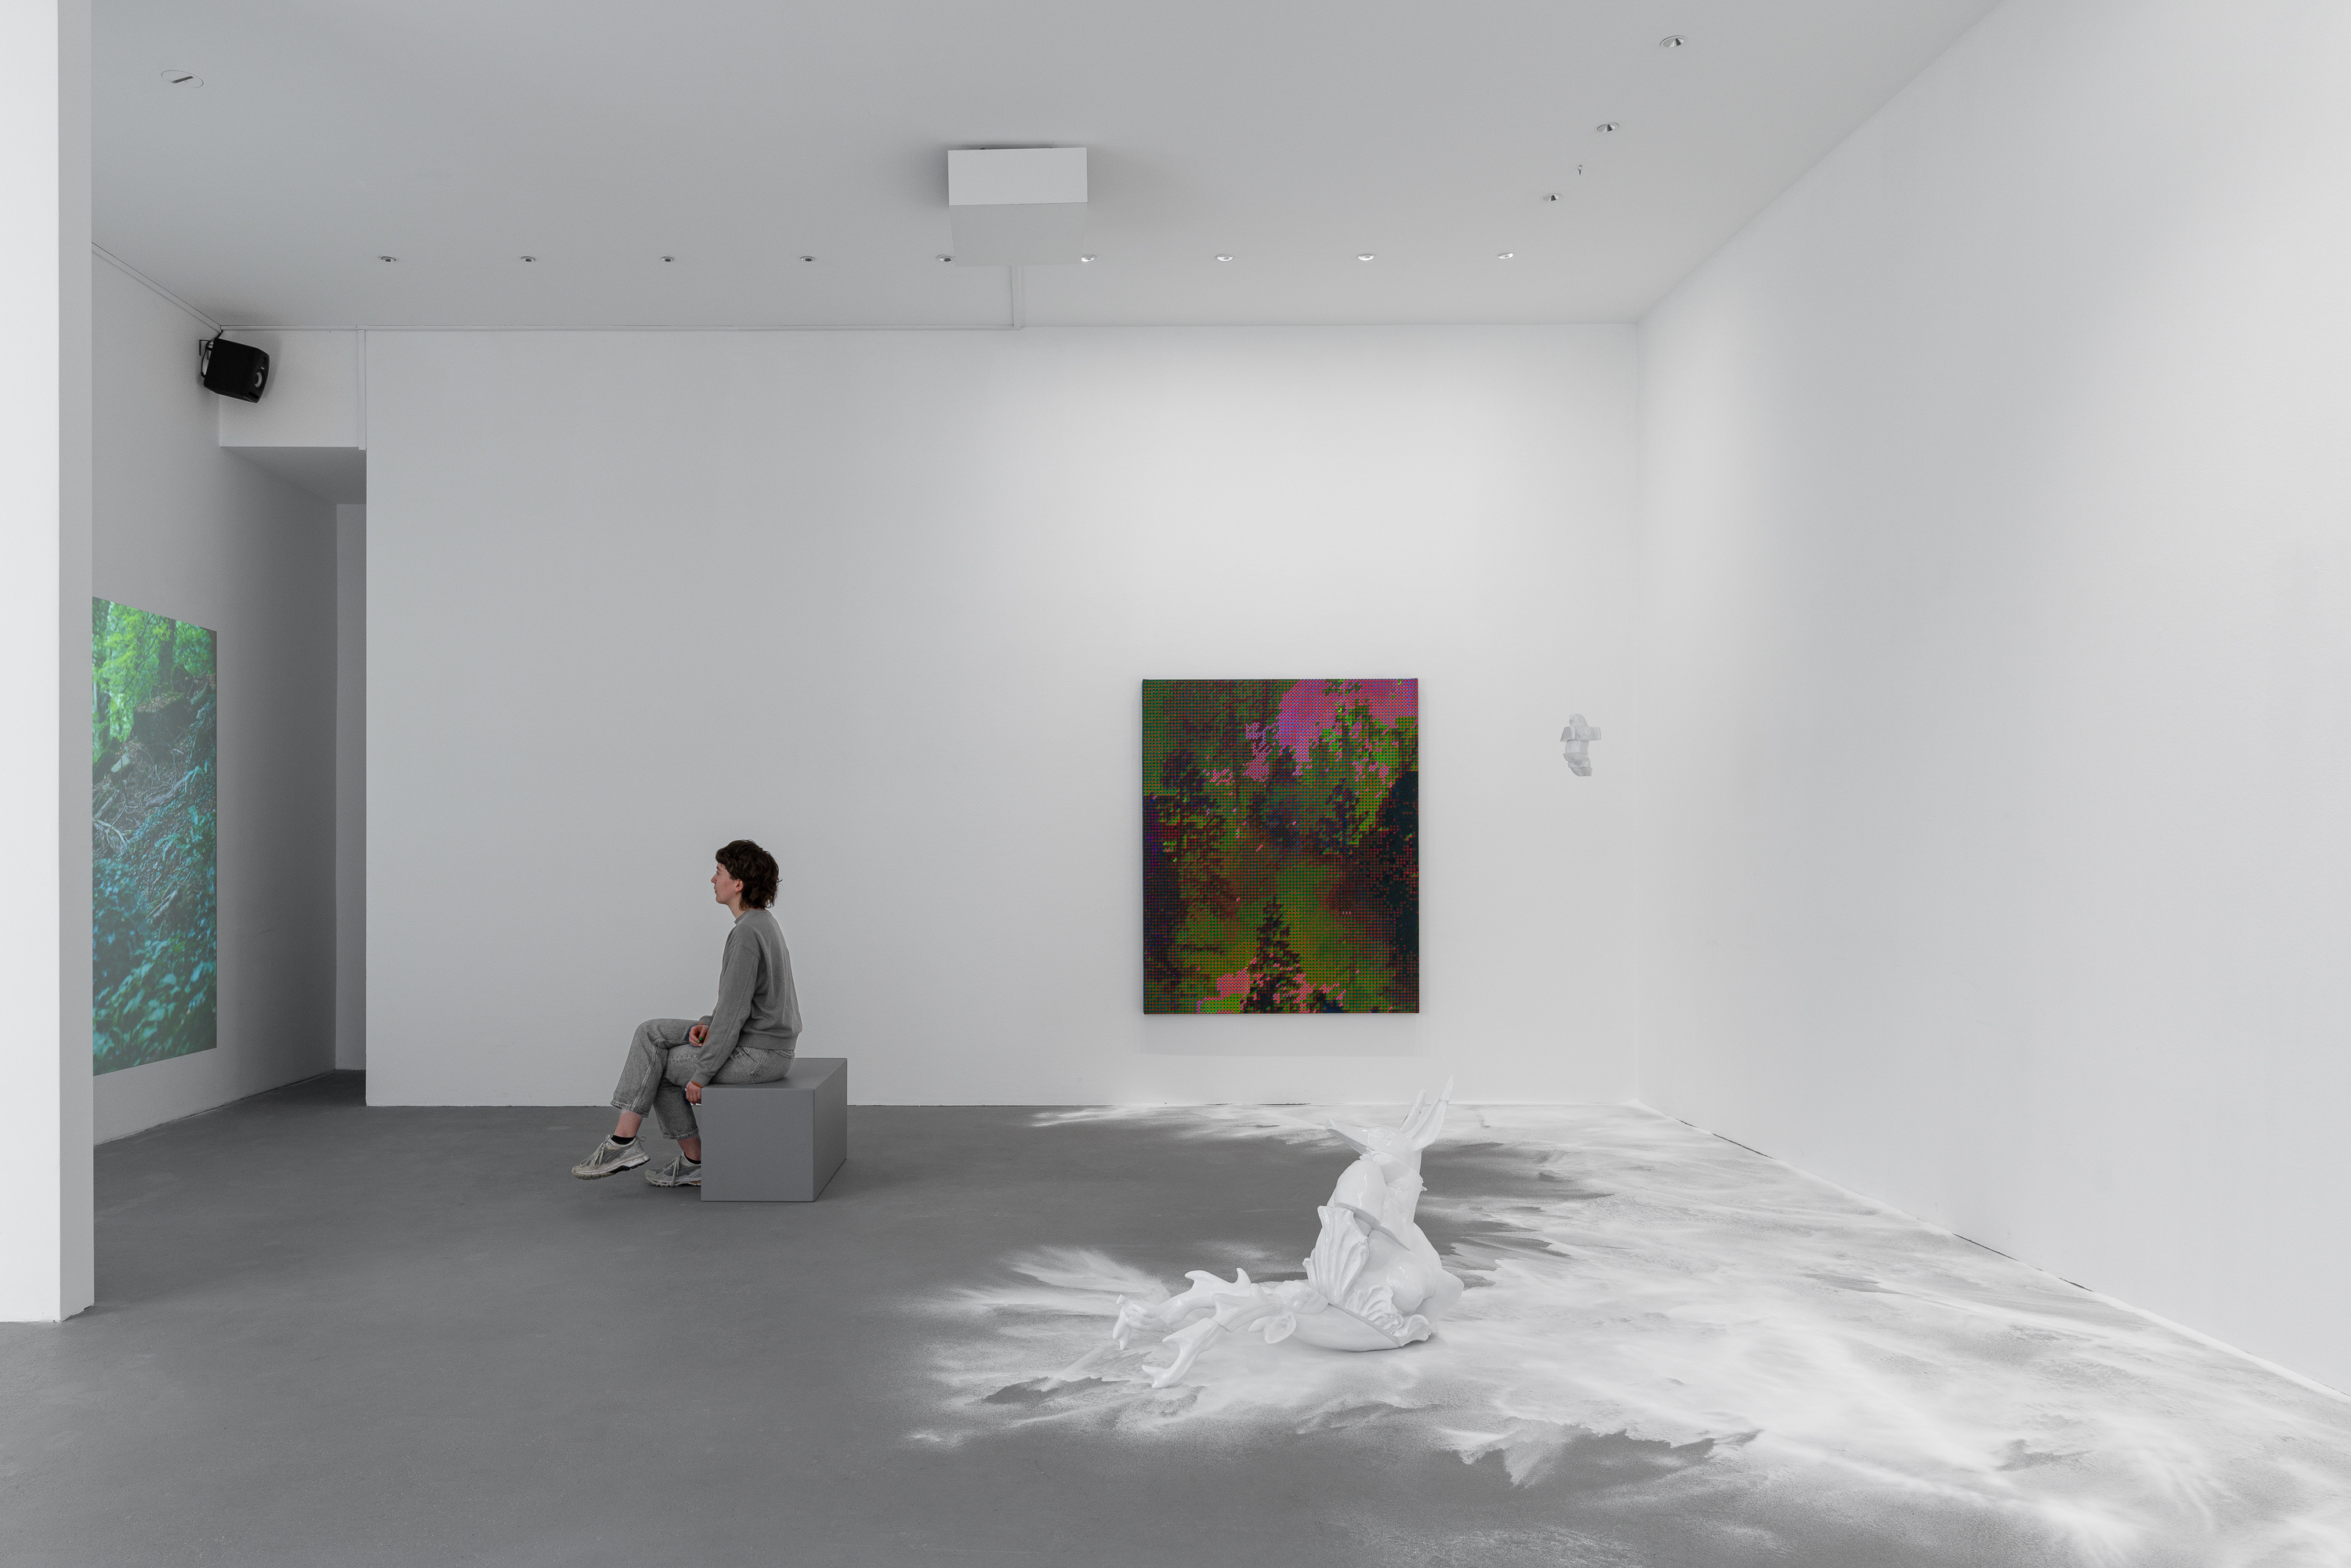 Installation view, in a forest of red, green and blue, 2023, CÃ©cile B. Evans and Troika, courtesy of max goelitz, copyright of the artists, photo: Dirk Tacke